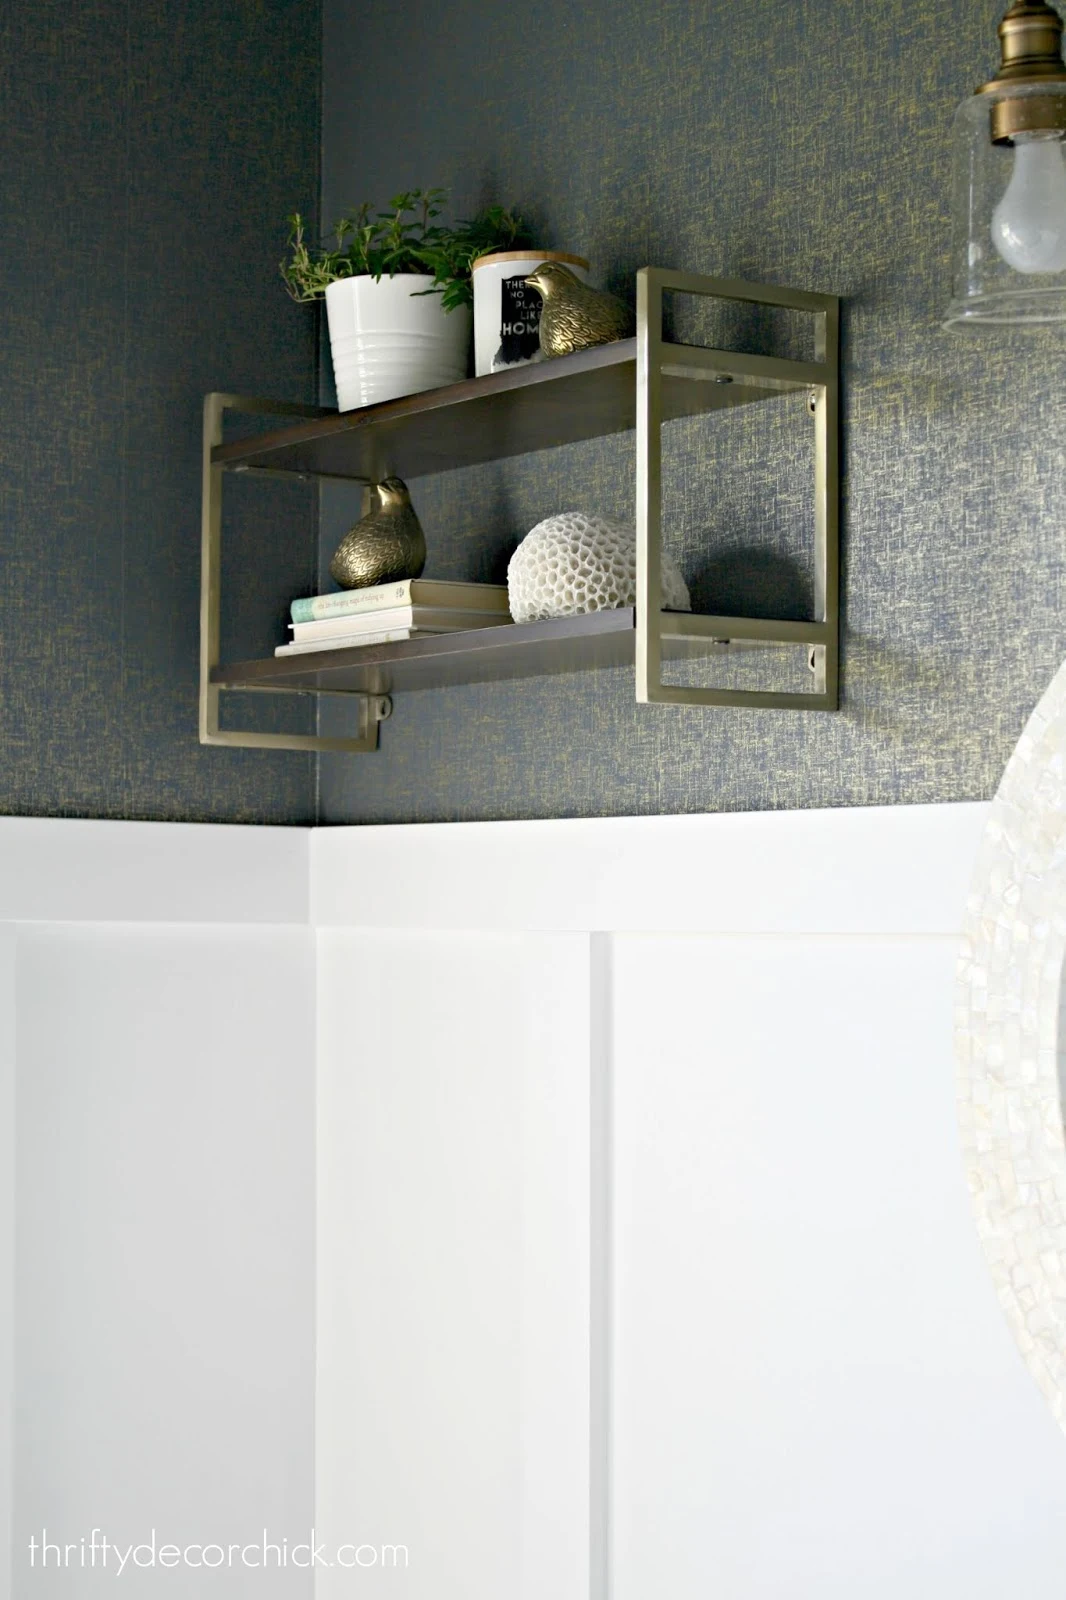 Wood and brass shelves above toilet